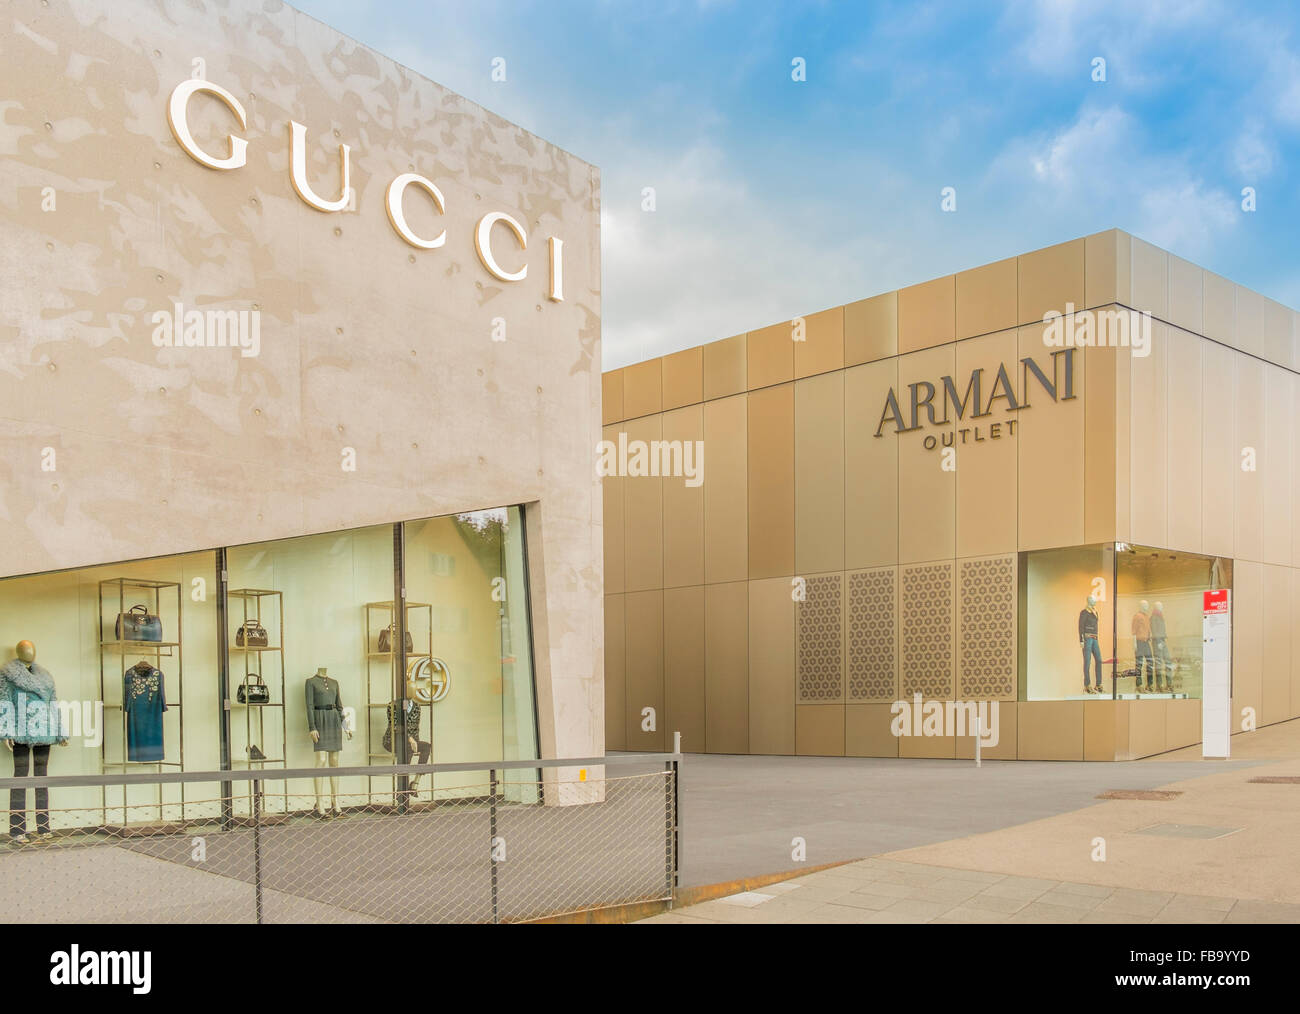 Gucci Outlet High Resolution Stock Photography and - Alamy